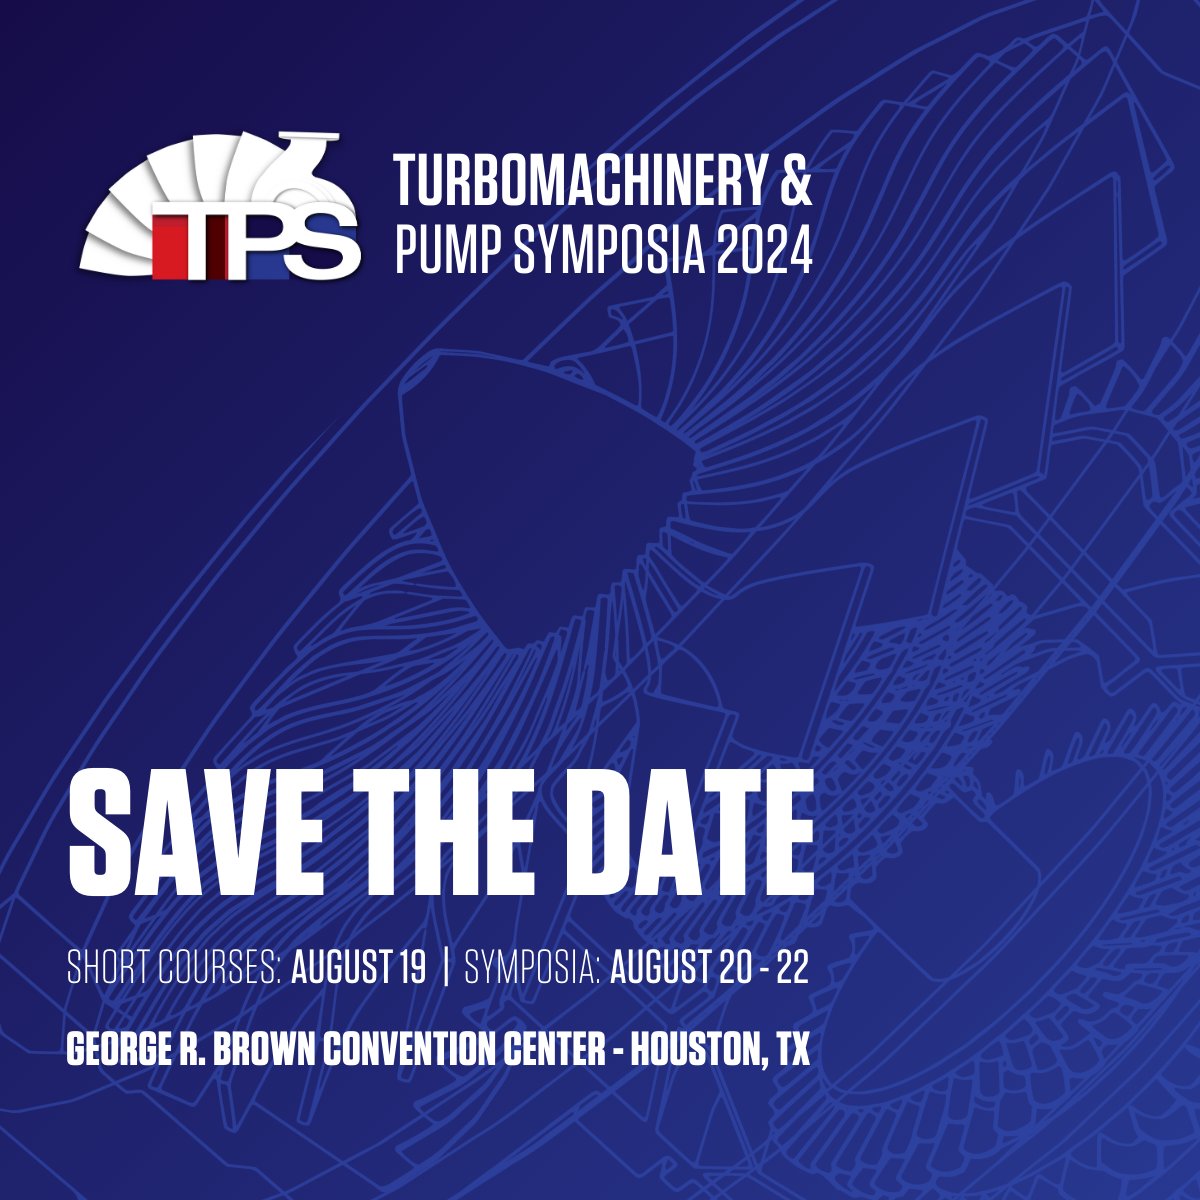 Save the Date for the #TPS2024! 🗓️ Join us next August for an exceptional event featuring our cutting-edge technical programs, a diverse exhibit hall & invaluable networking opportunities. Learn more about our past programs, symposia updates, and more at tps.tamu.edu